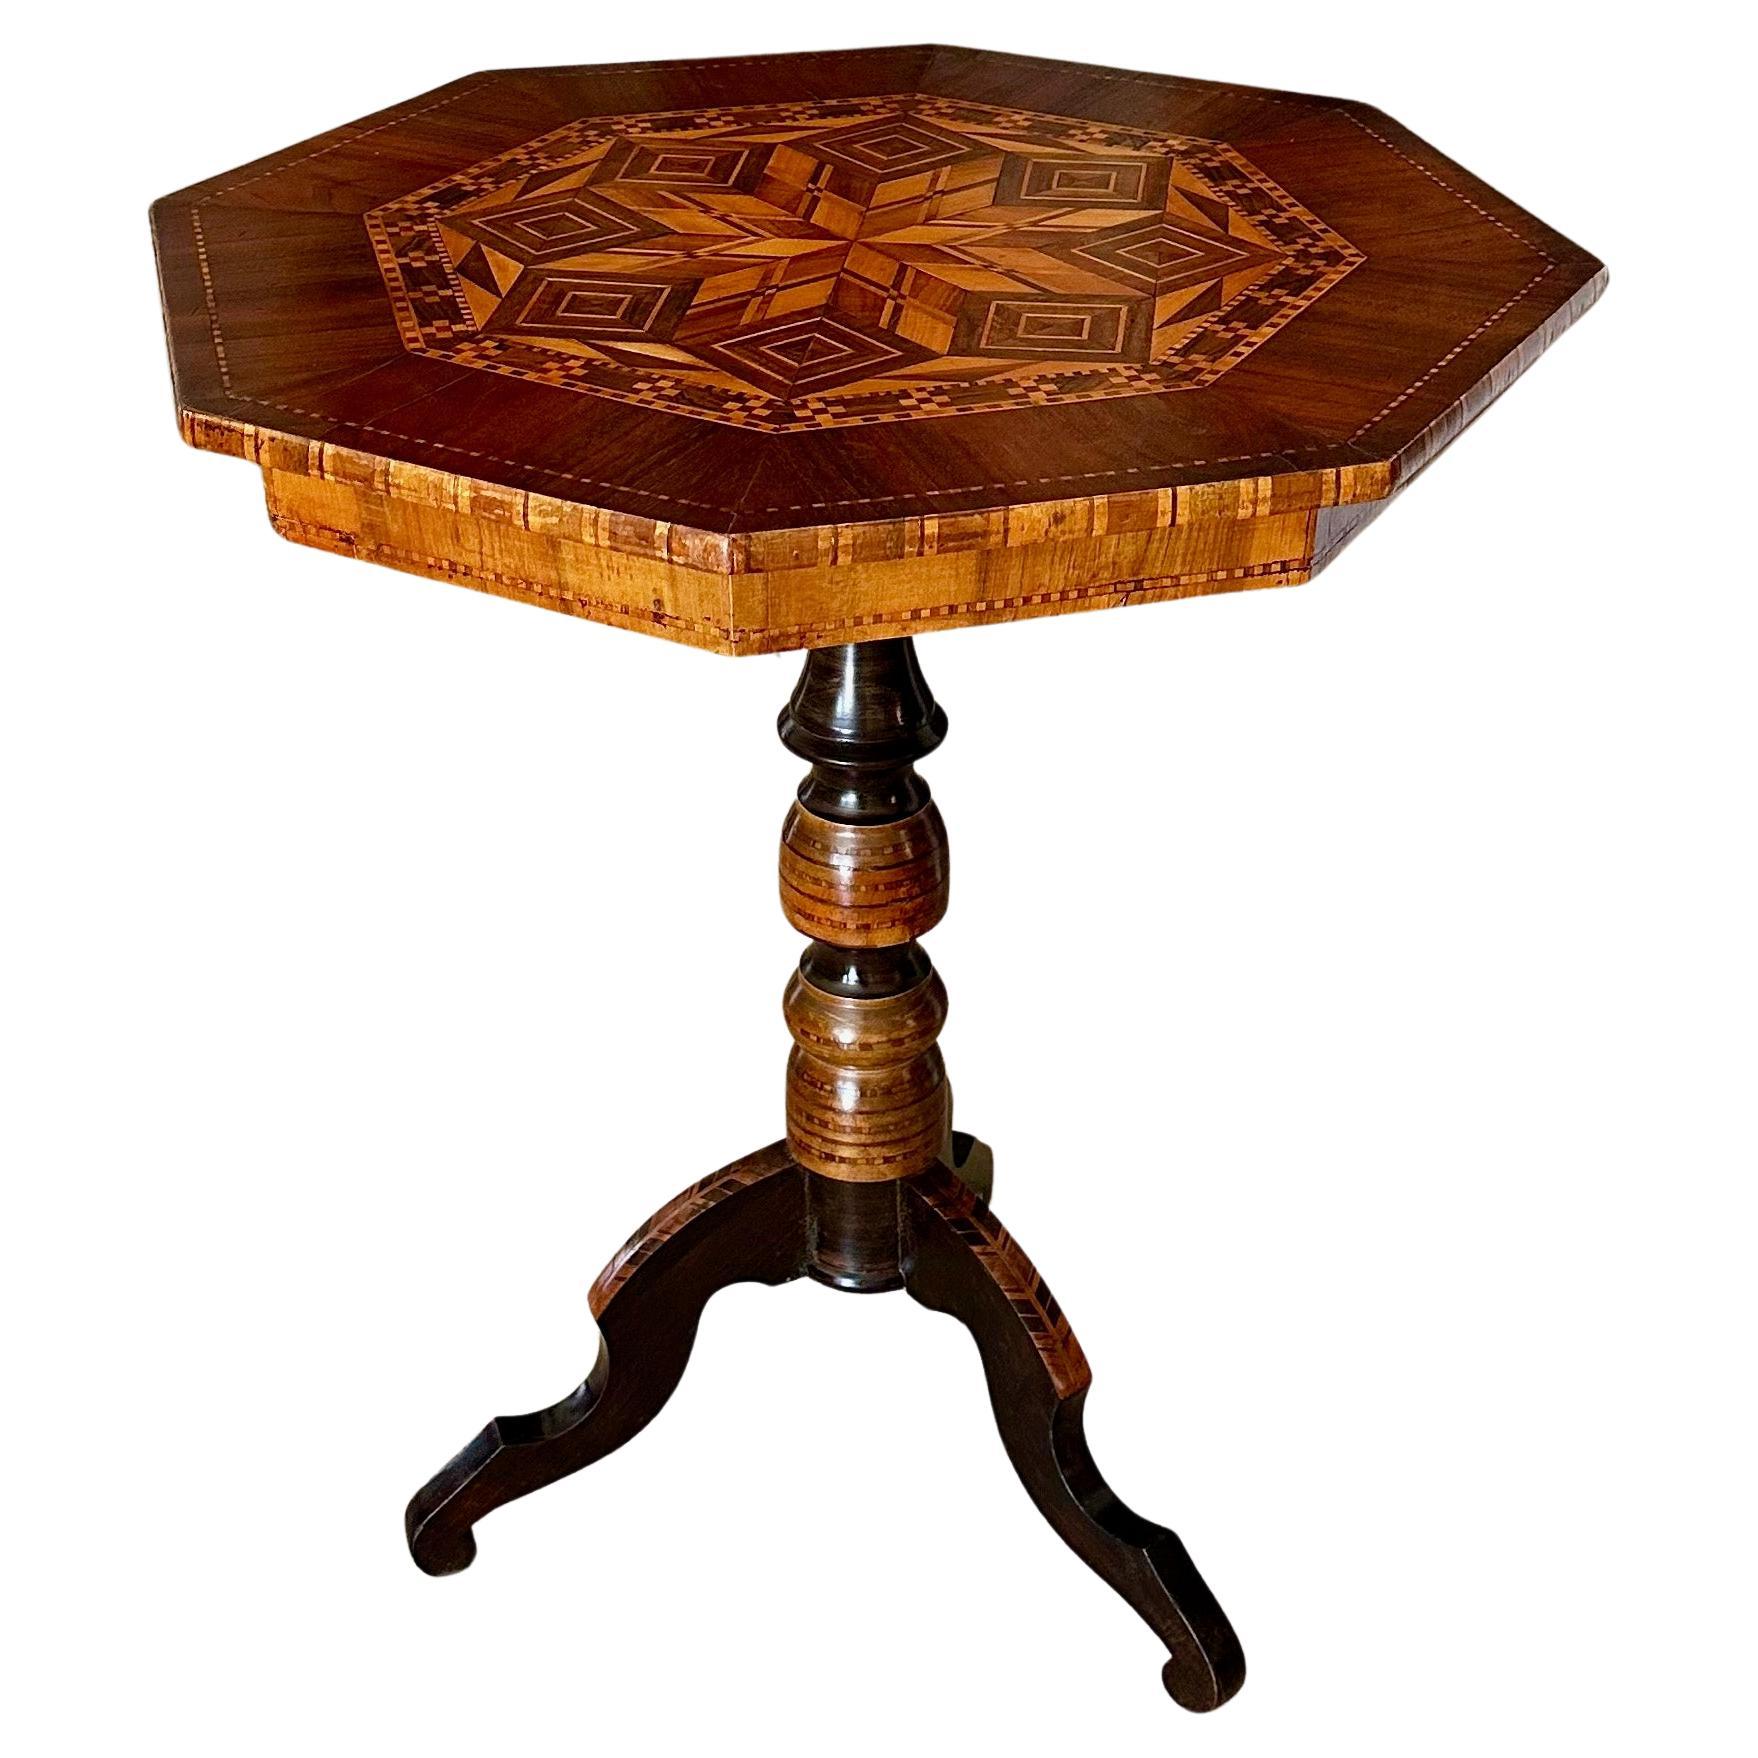 Italian Sorrento Inlaid Marquetry Side Table Circa 1900 For Sale